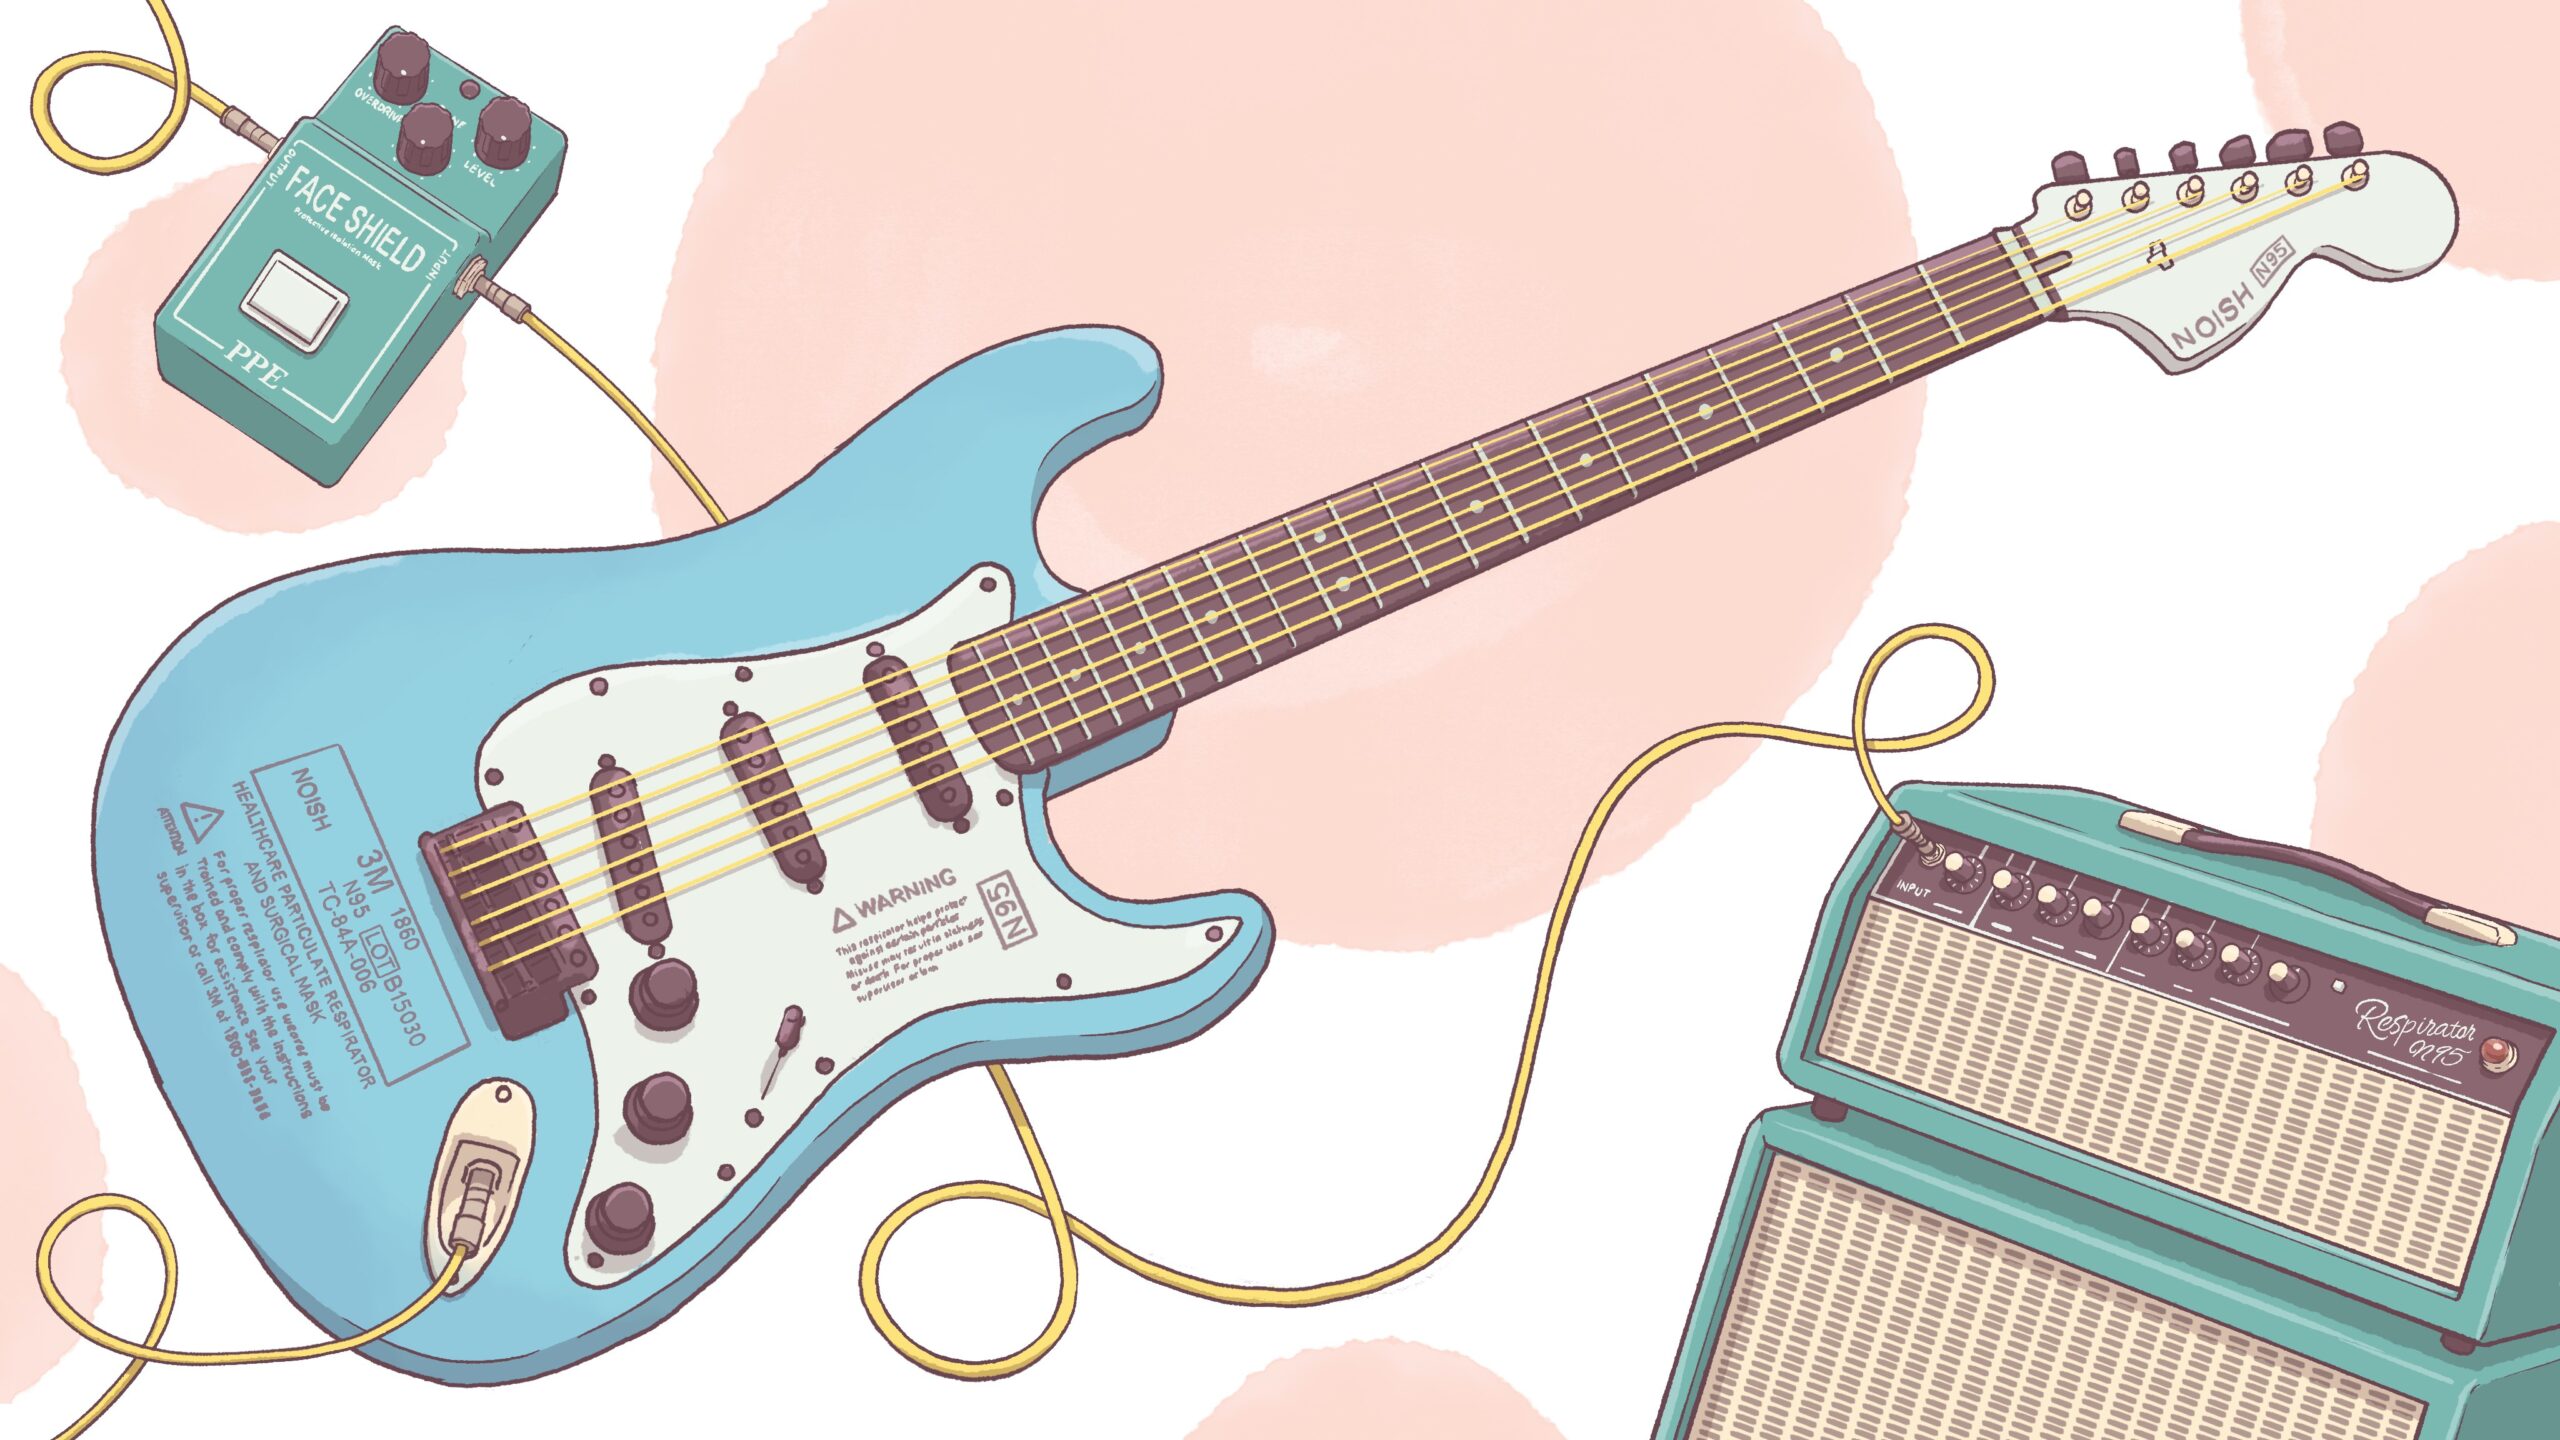 Illustration of electric guitar, pedal, and amp.